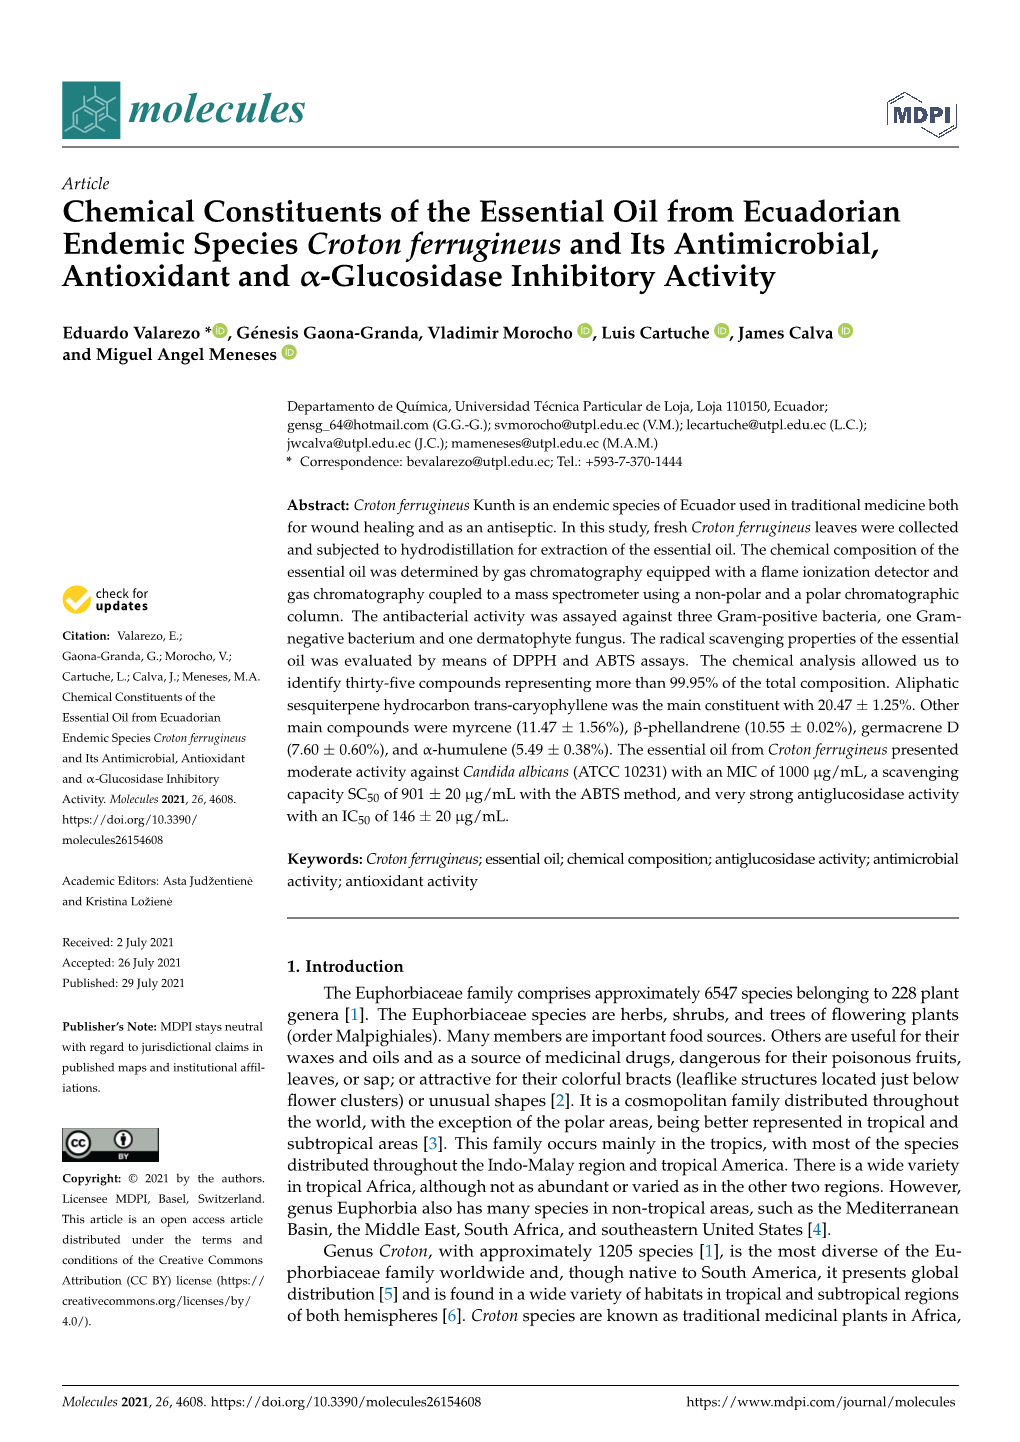 Chemical Constituents of the Essential Oil from Ecuadorian Endemic Species Croton Ferrugineus and Its Antimicrobial, Antioxidant and Α-Glucosidase Inhibitory Activity